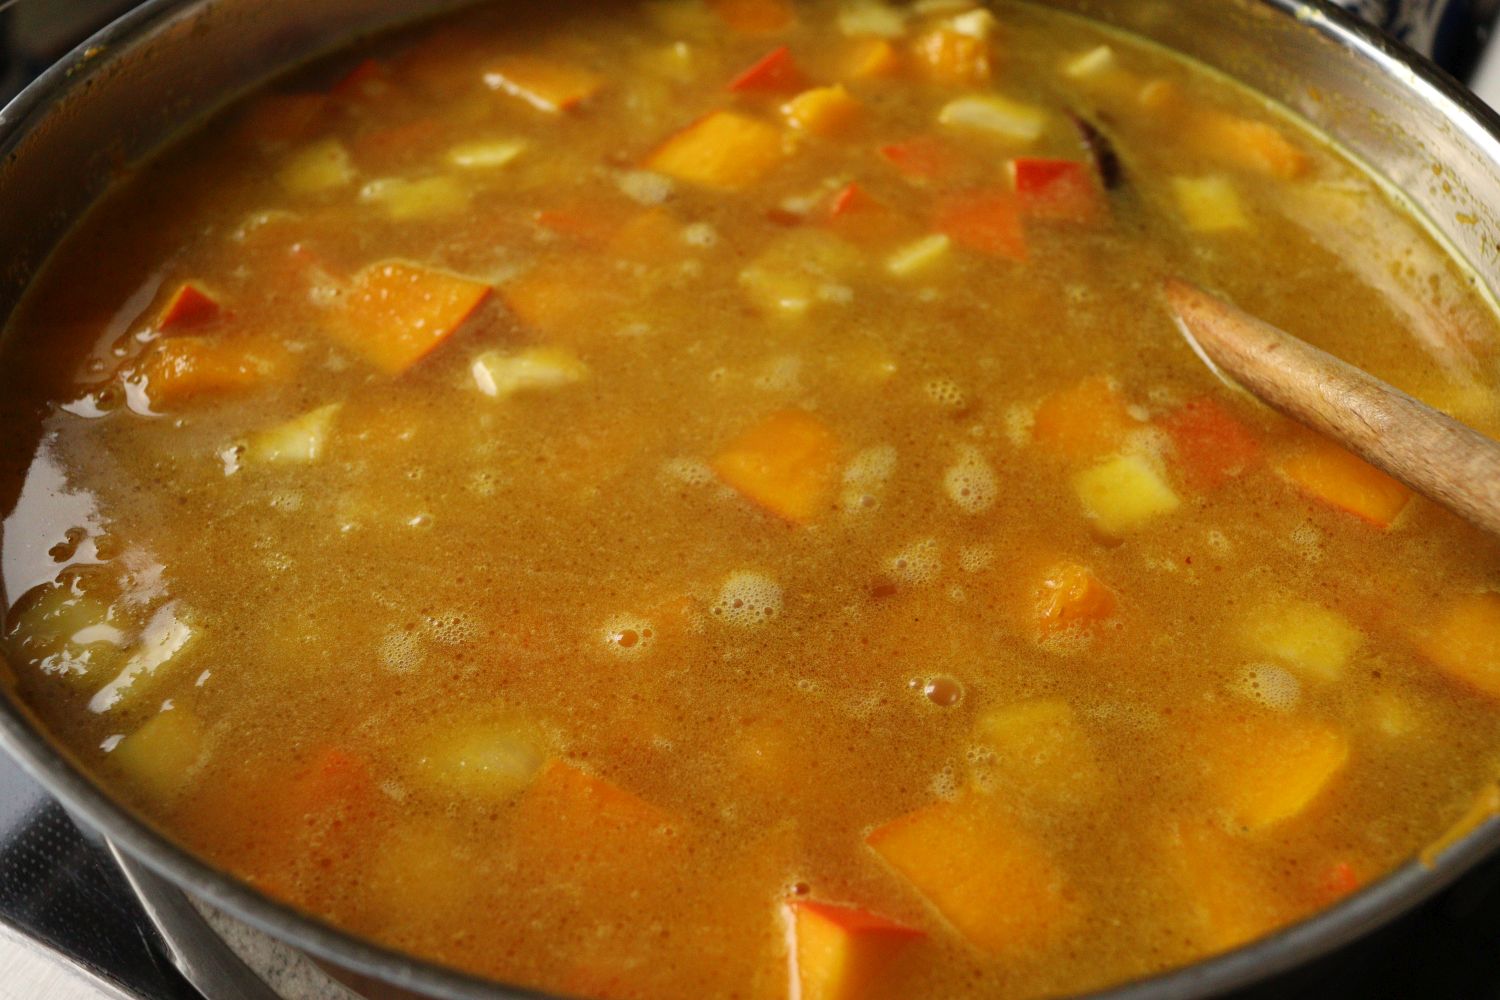 Boiled pumpkin, celery root, carrots, potatoes and onion cubes in a pan for making pumpkin soup